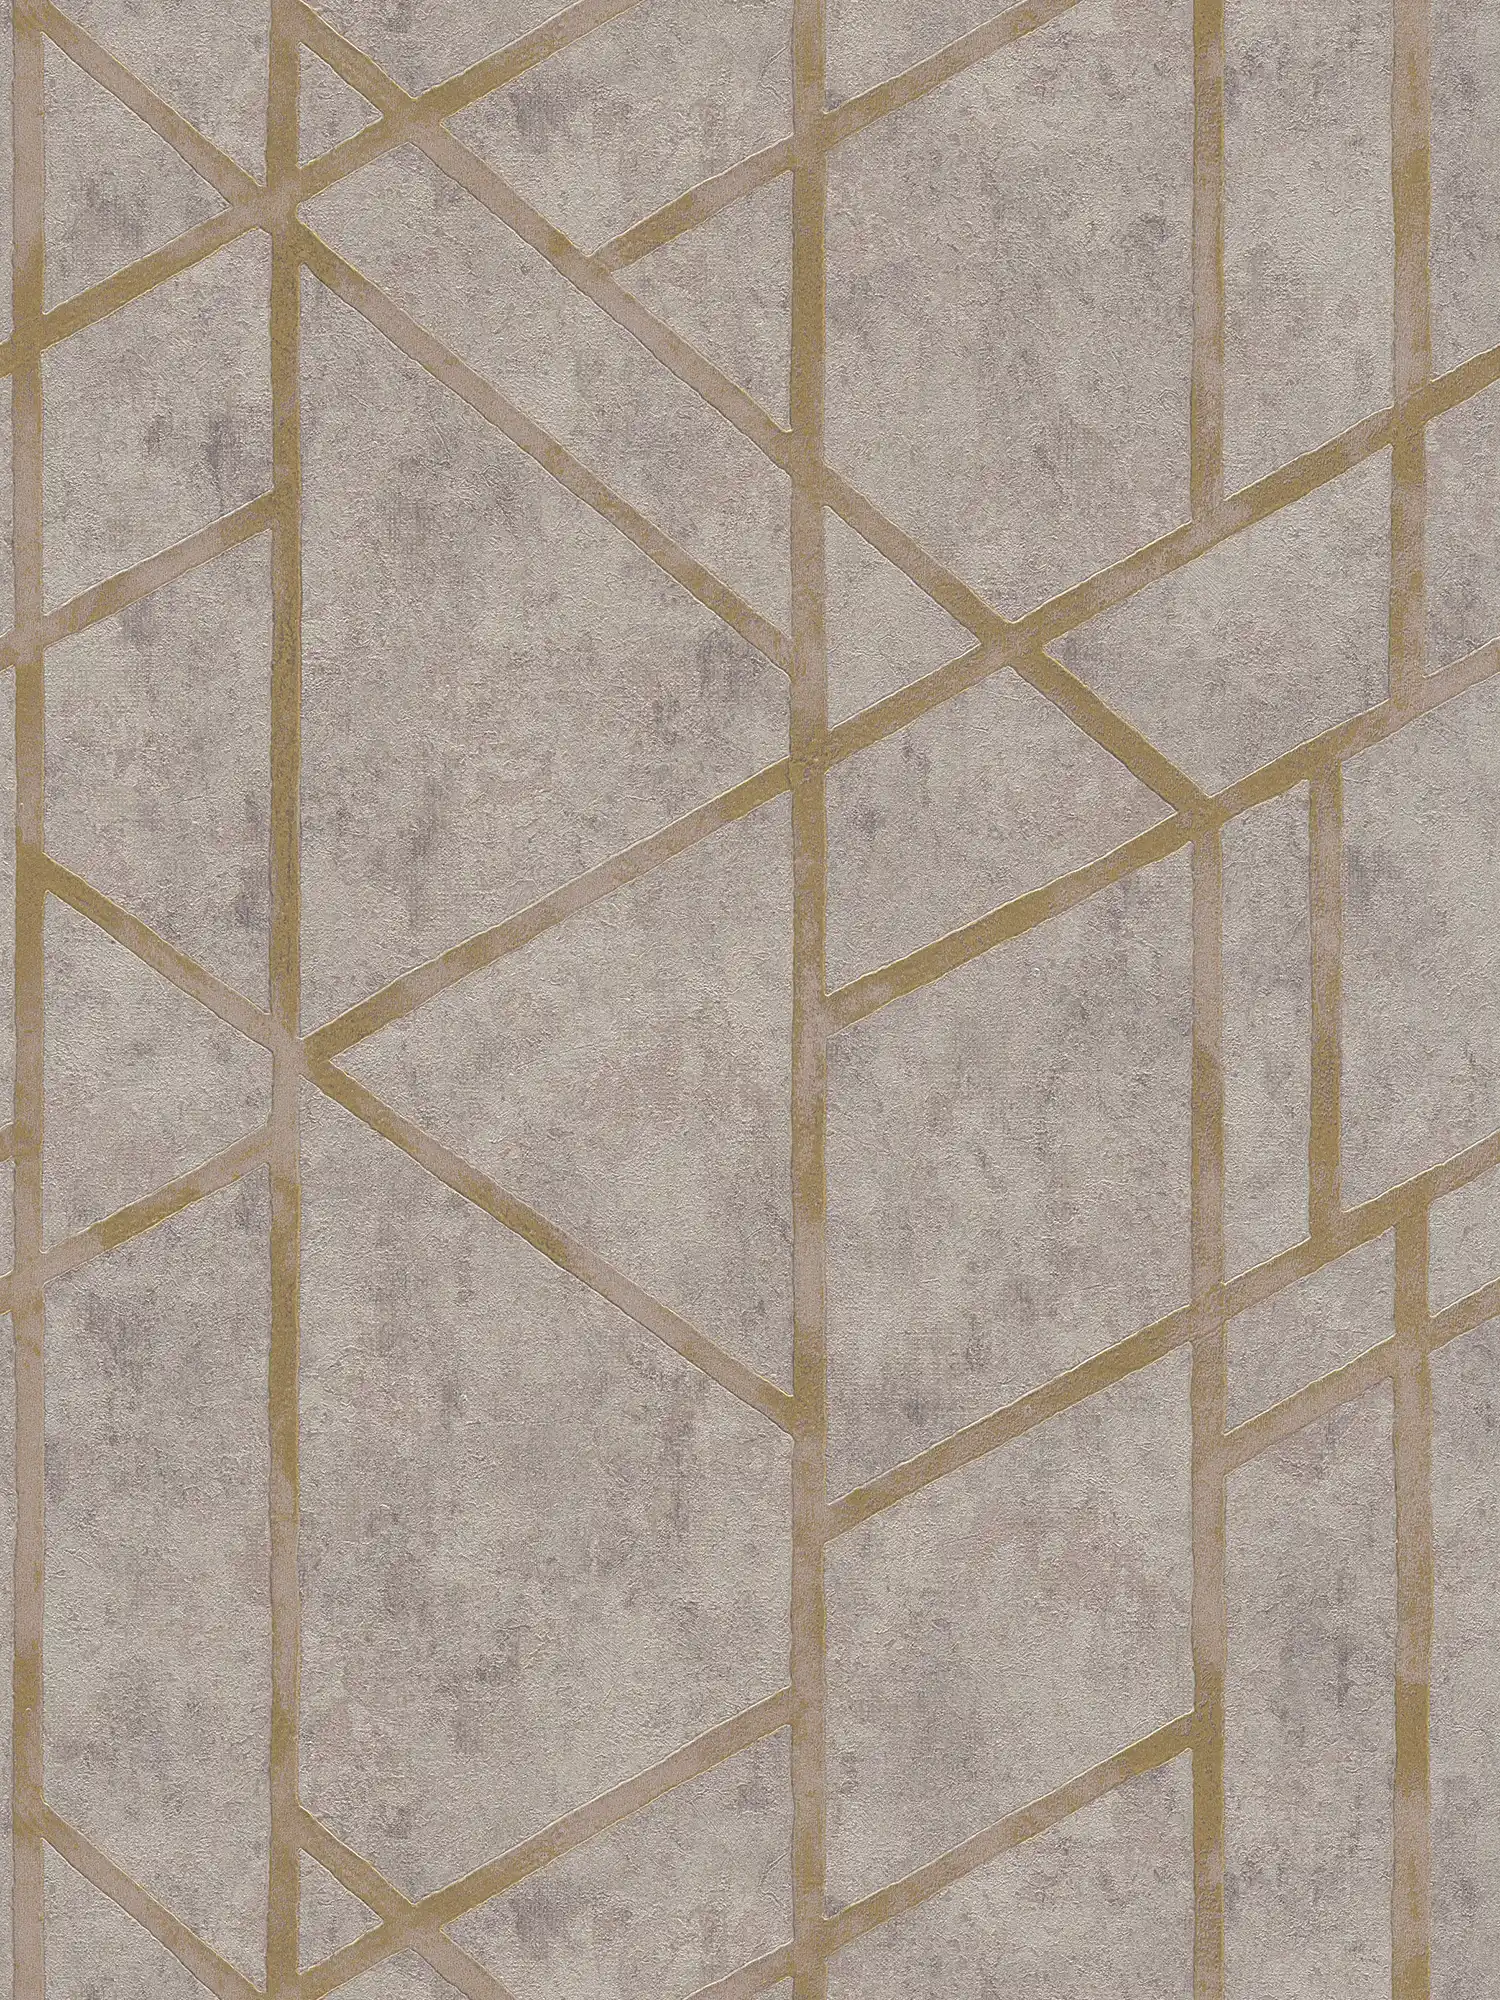 Concrete wallpaper with golden lines pattern - gold, beige, grey
